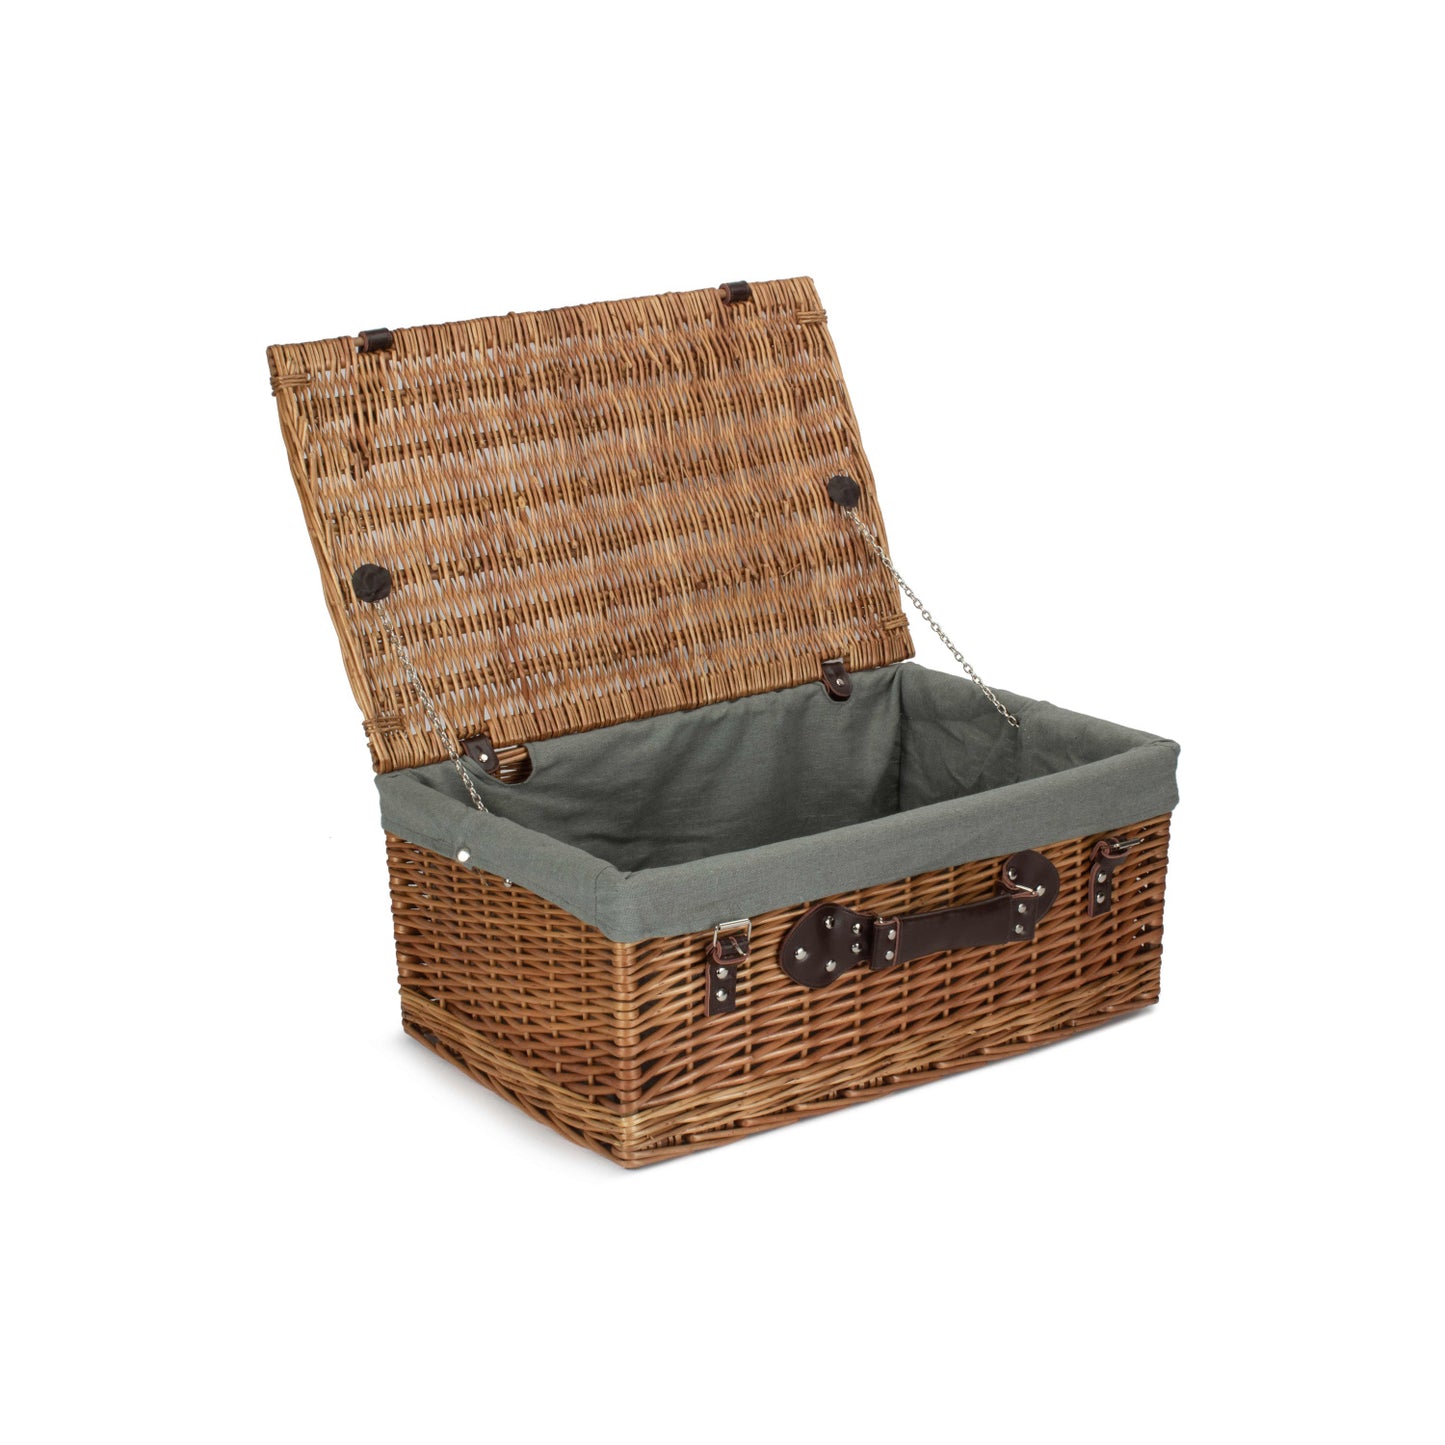 22 Inch Double Steamed Hamper With Grey Sage Lining